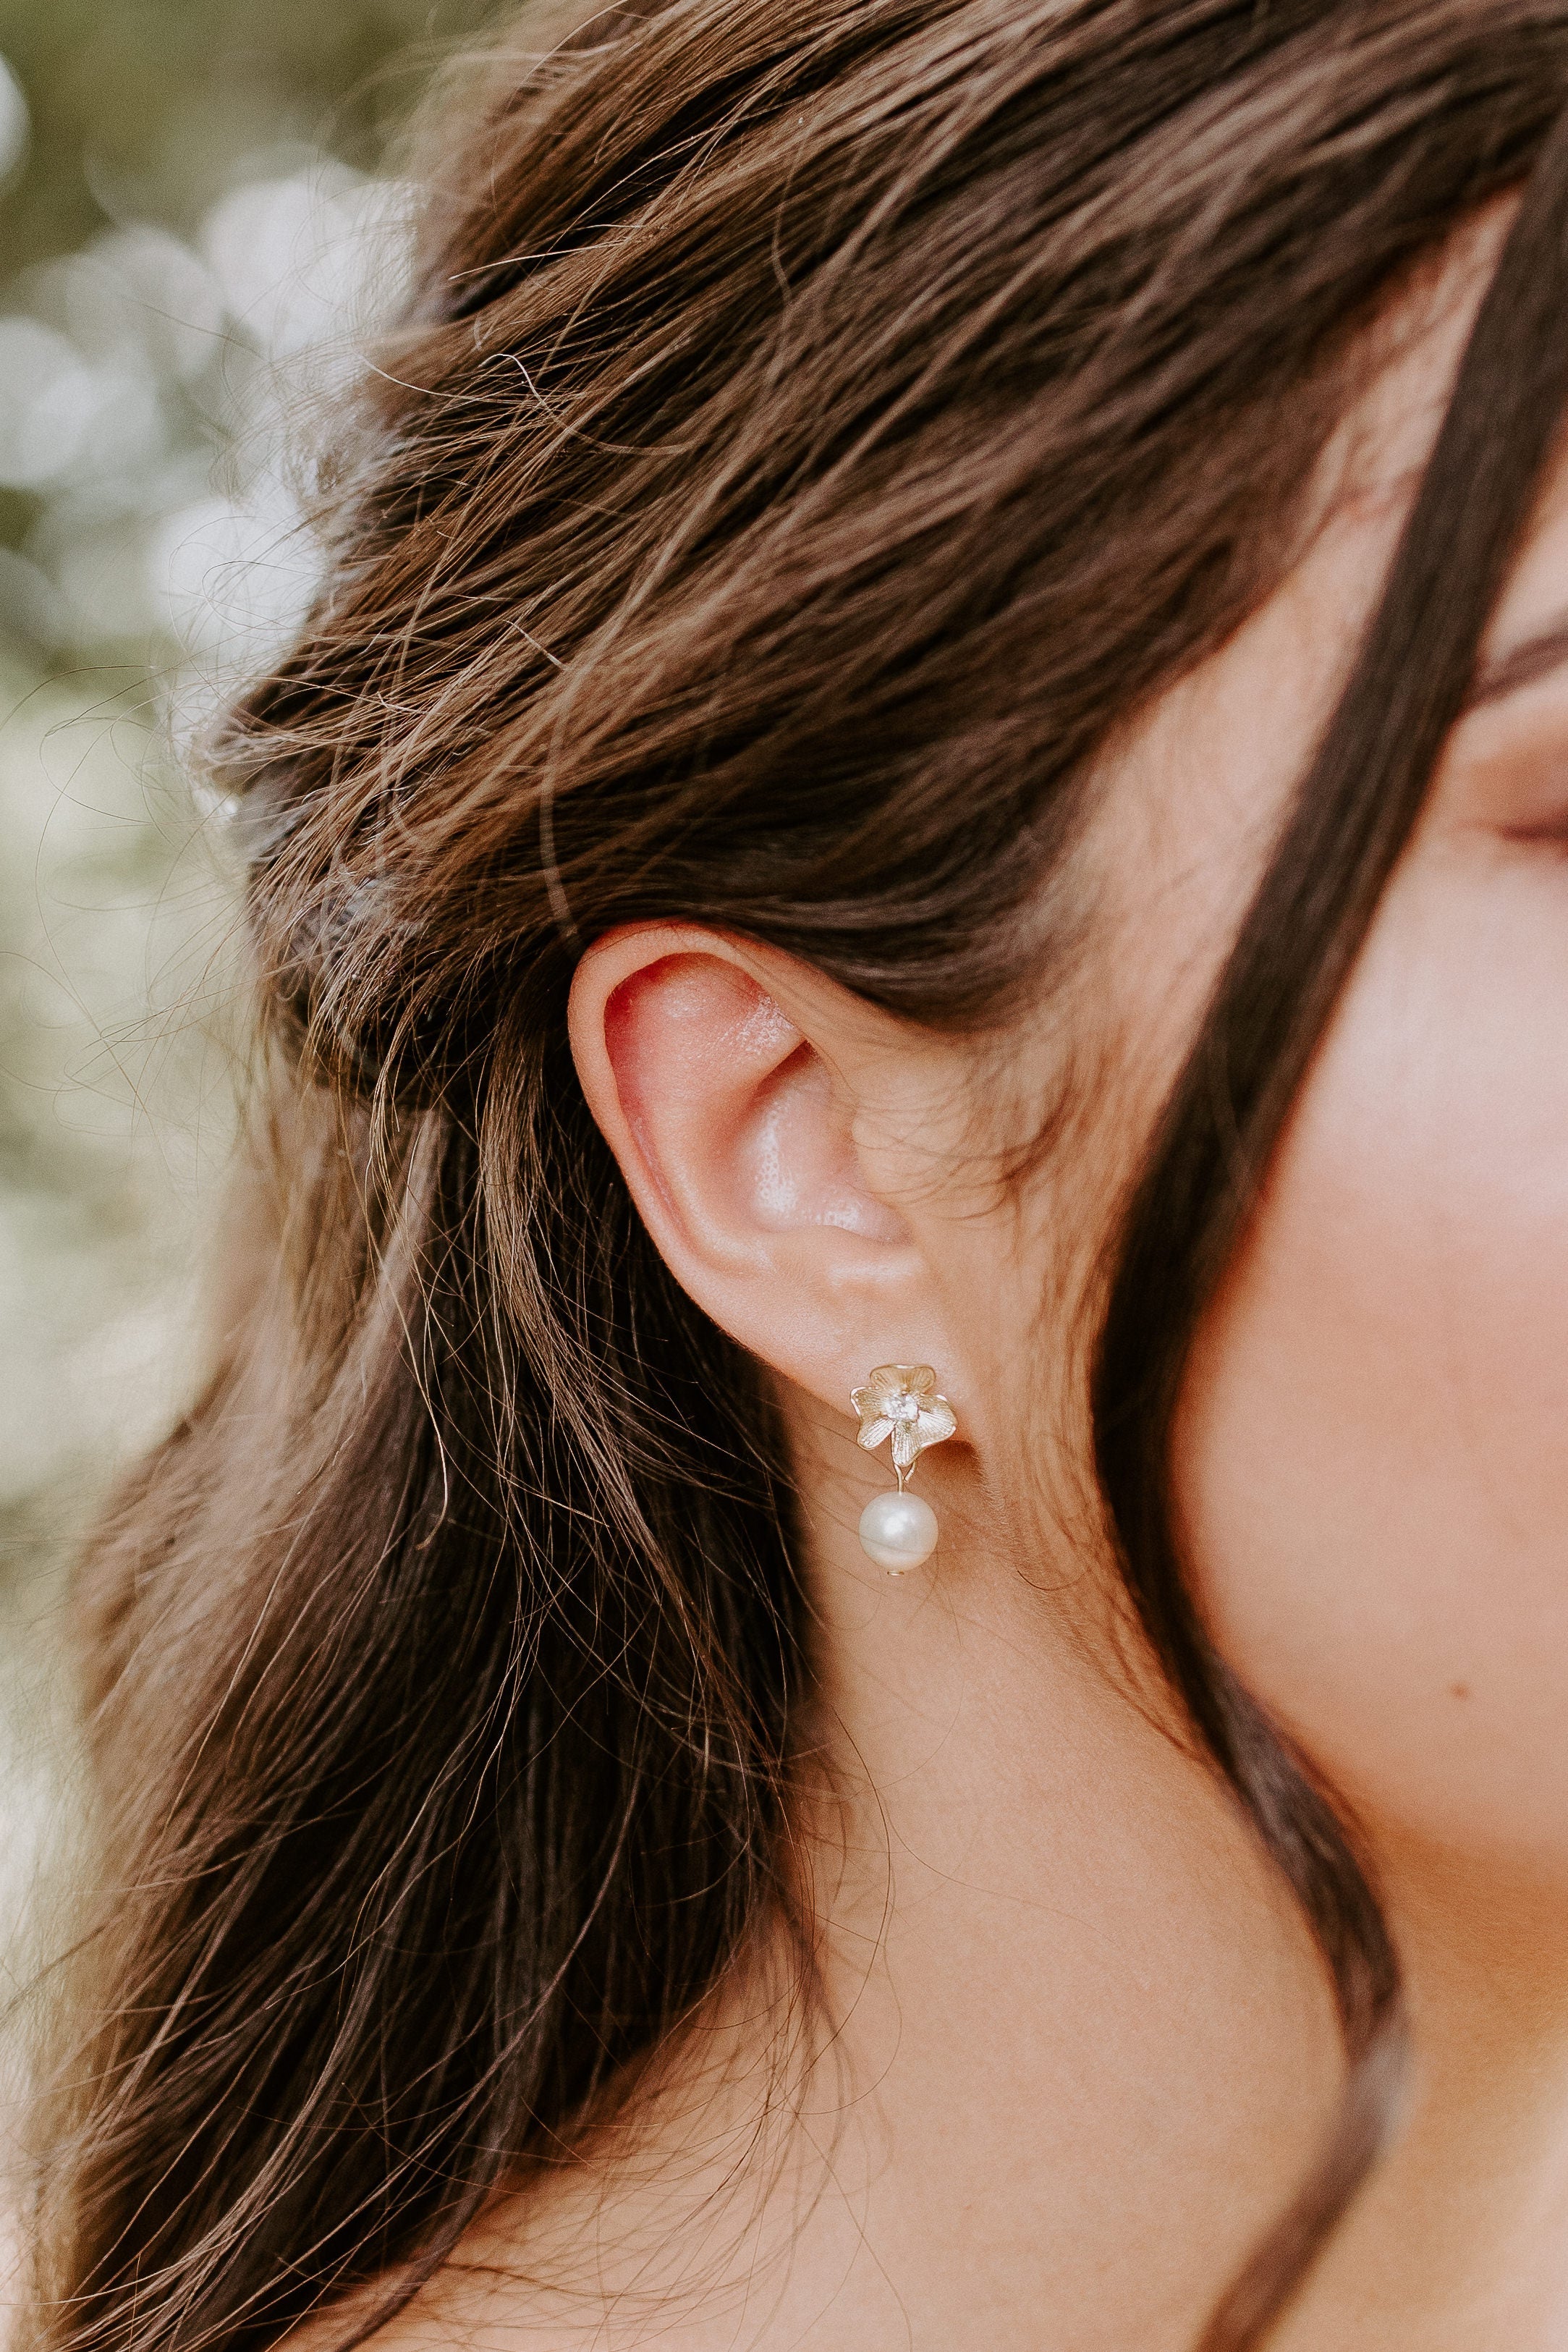 HANA // Silver floral and pearl earrings